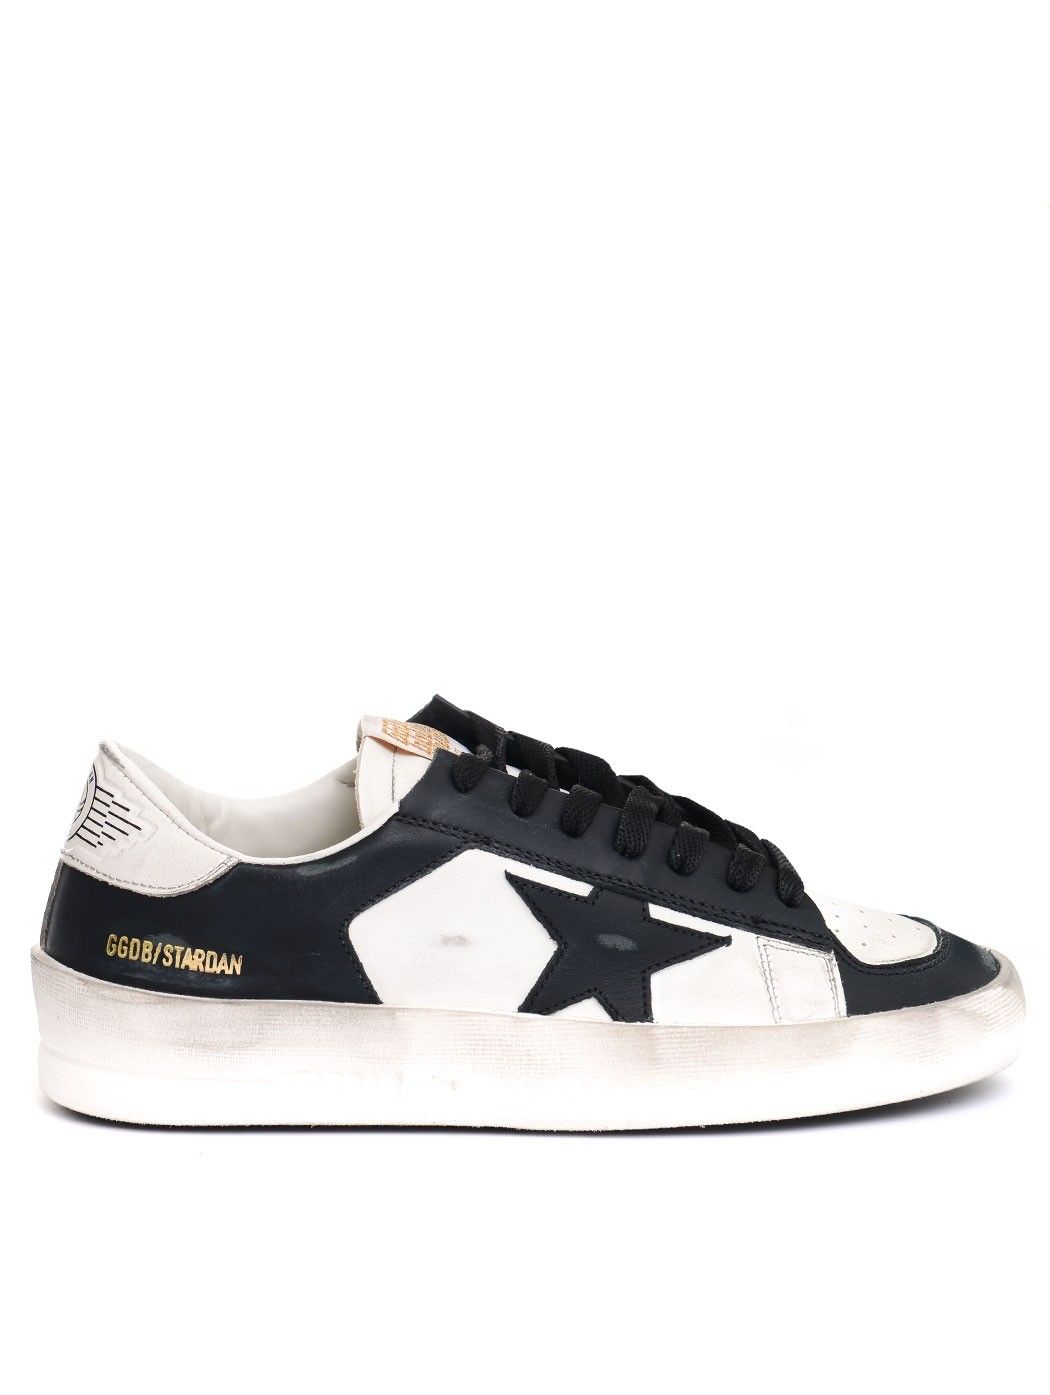  WOMAN SHOES,GIVENCHY SHOES,GOLDEN GOOSE SHOES,MARNI SHOES  GOLDEN GOOSE GWF00128